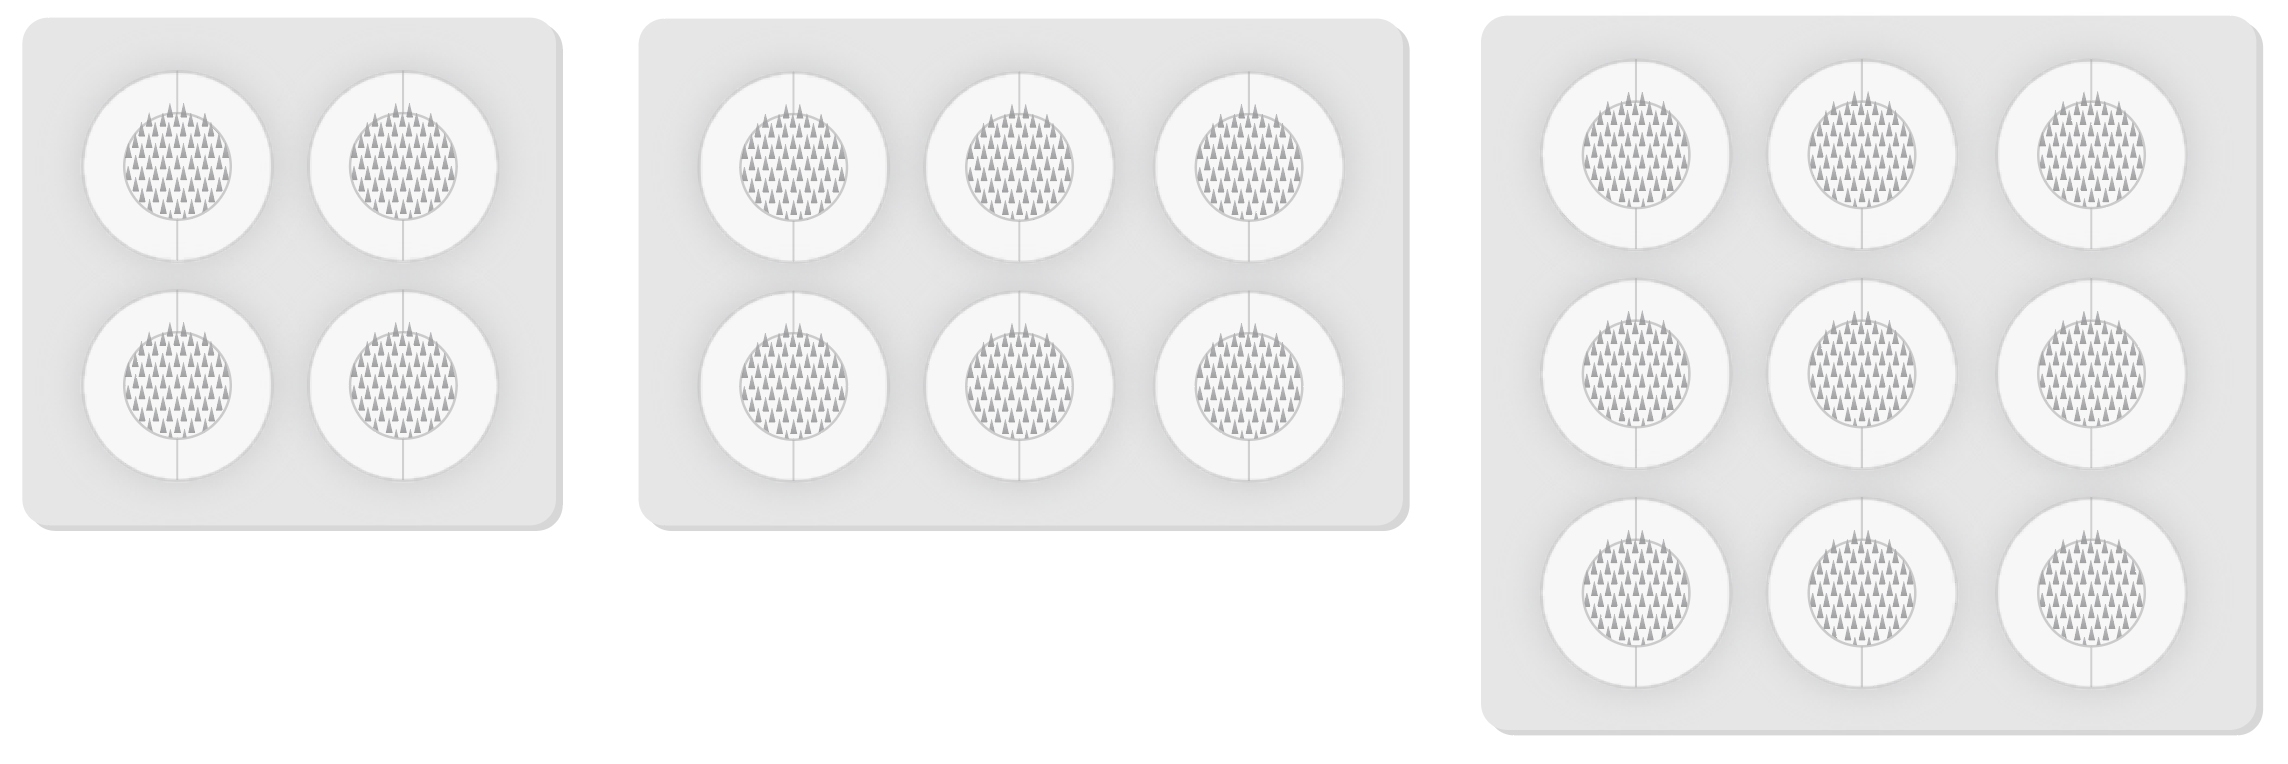 4,6,9 pieces of microneedle patch mockup